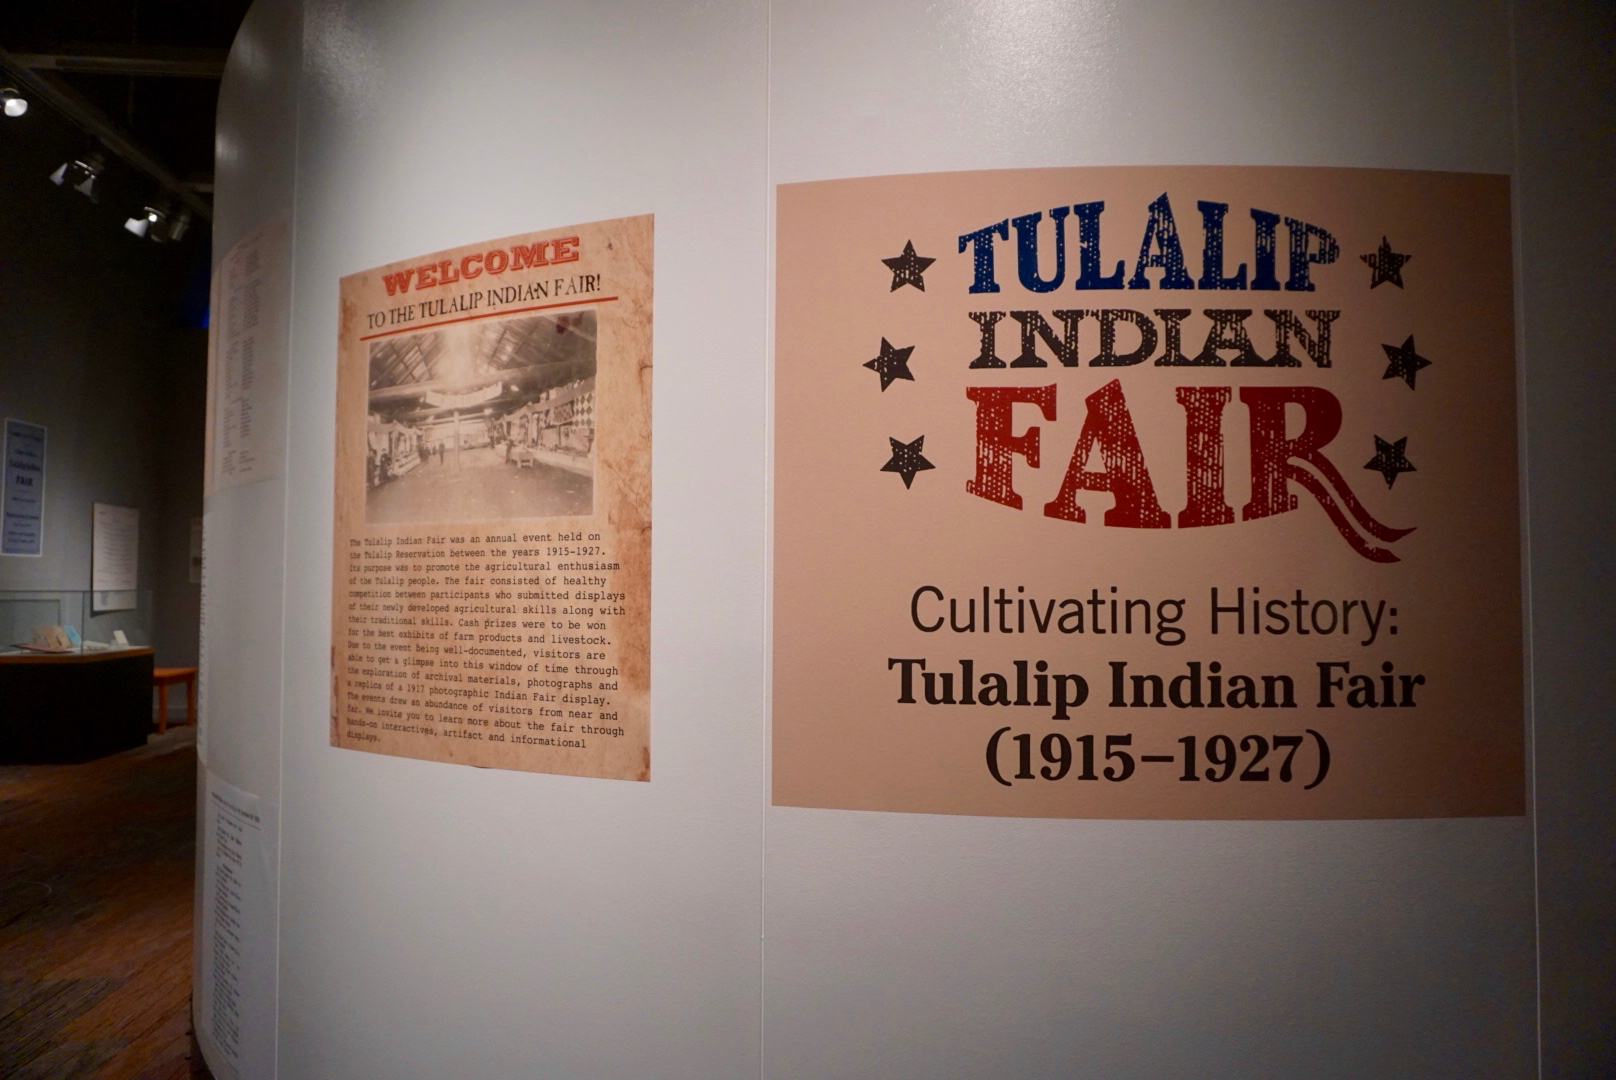 The current temporary exhibit highlights the Tulalip Indian Fair of 1915 - 1927.